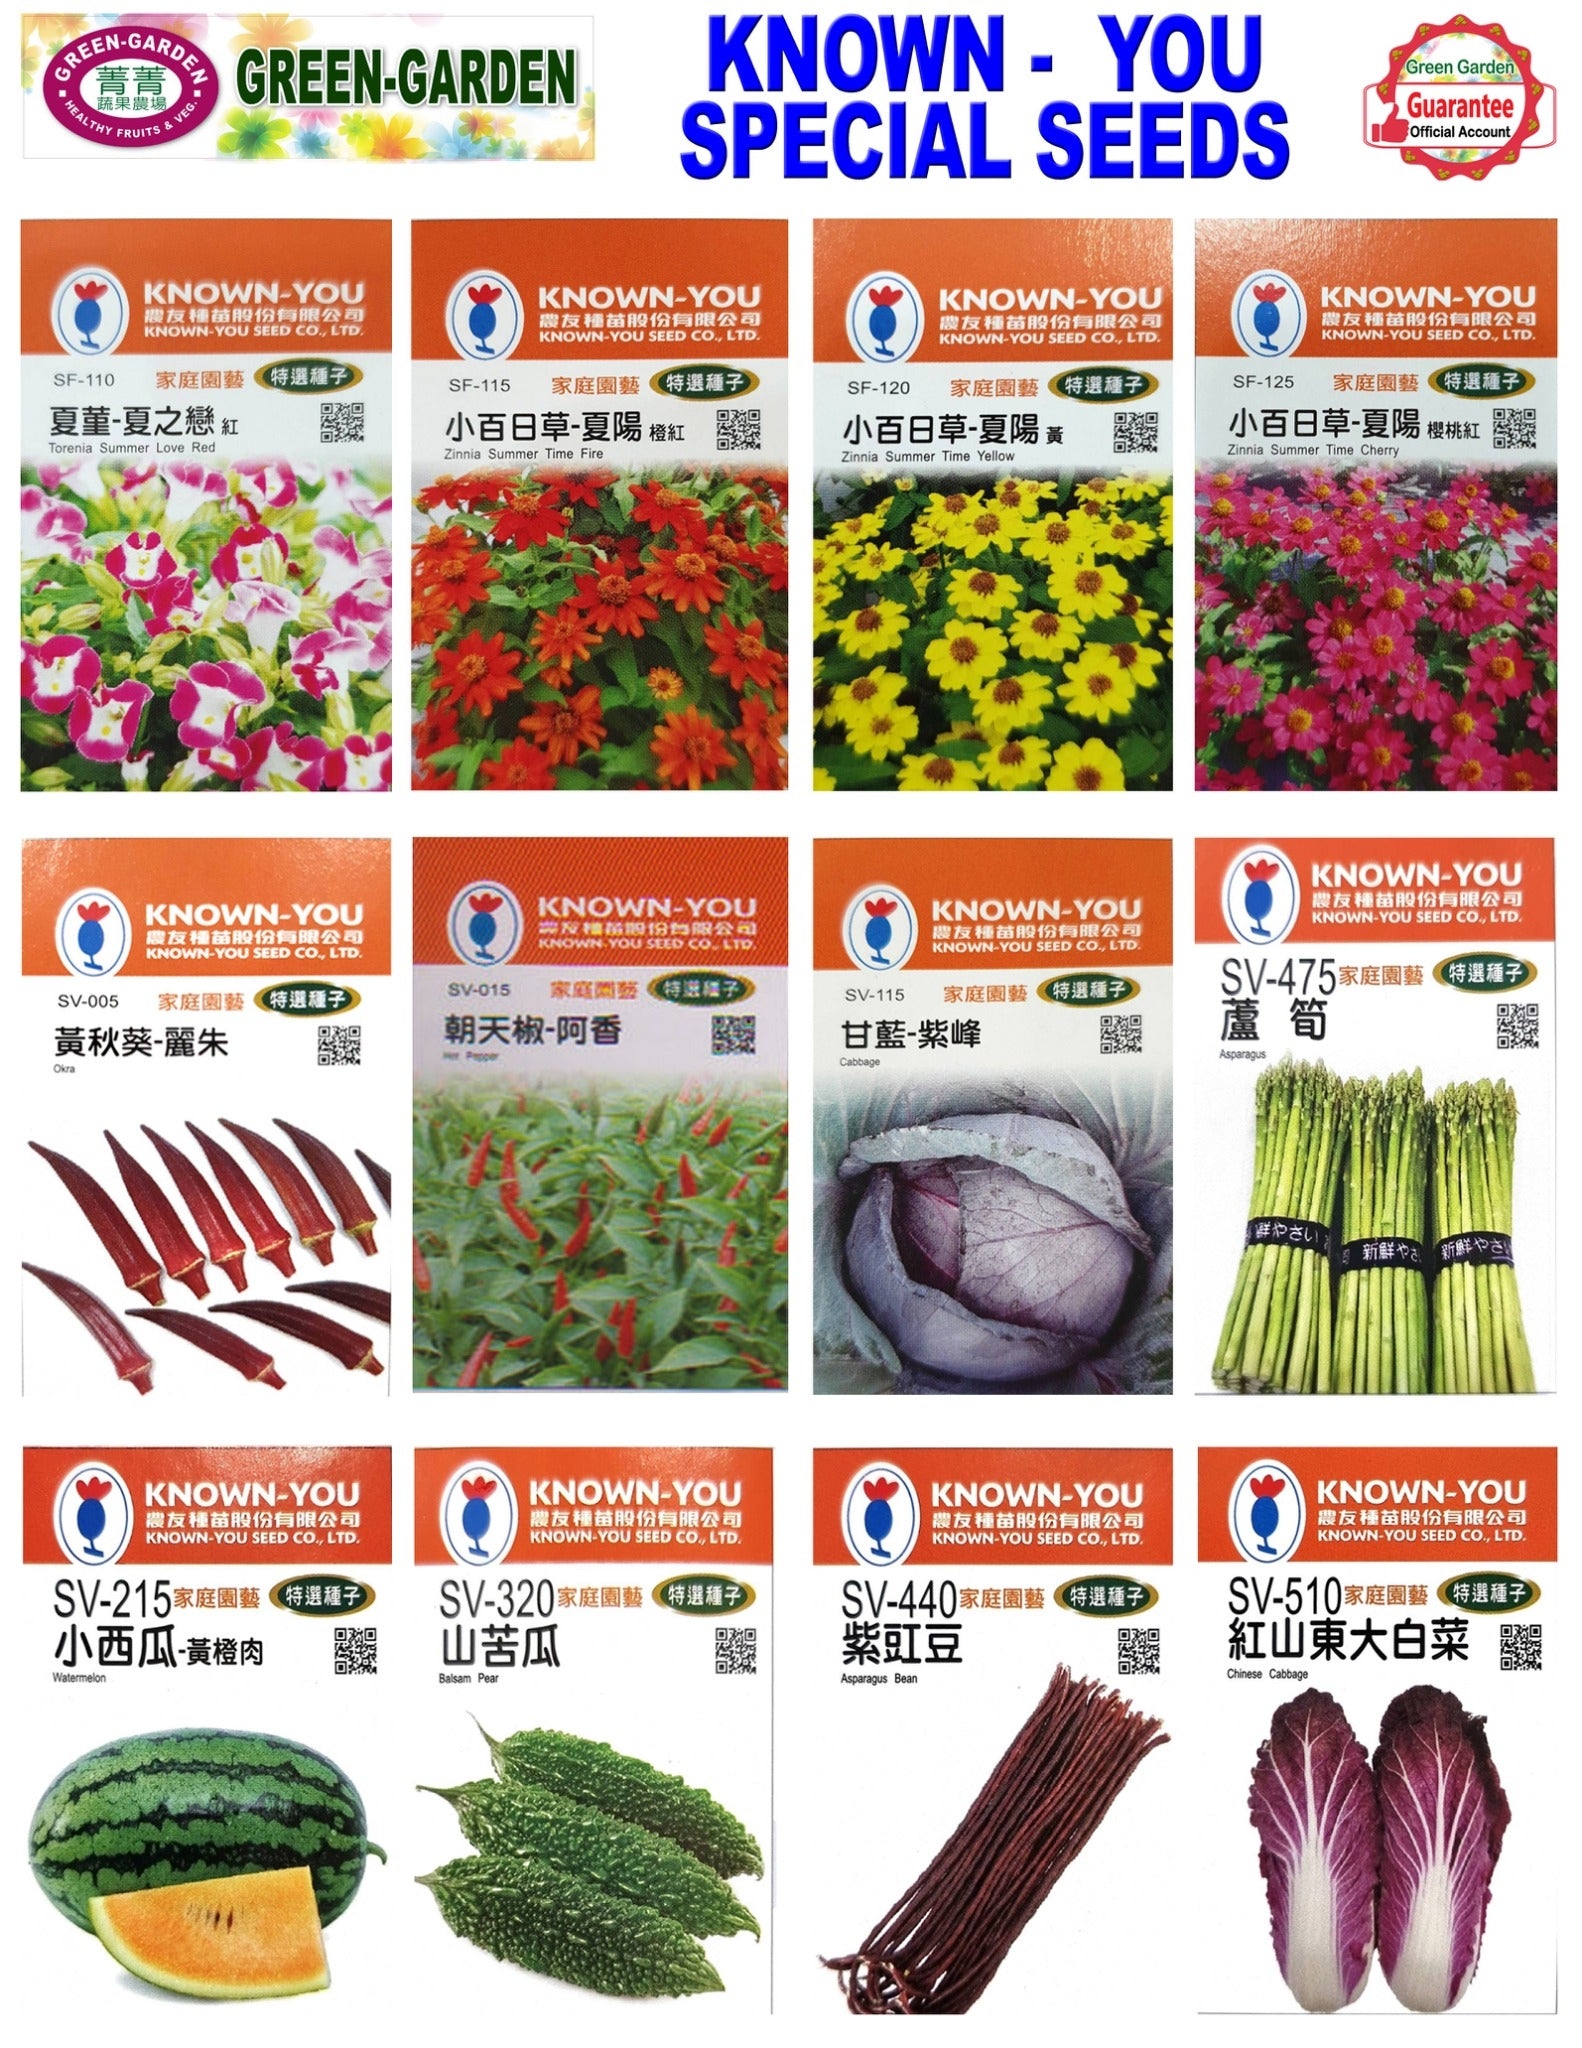 Known You Special Seeds (SB-090 Red Amaranth/Baby Leaf)